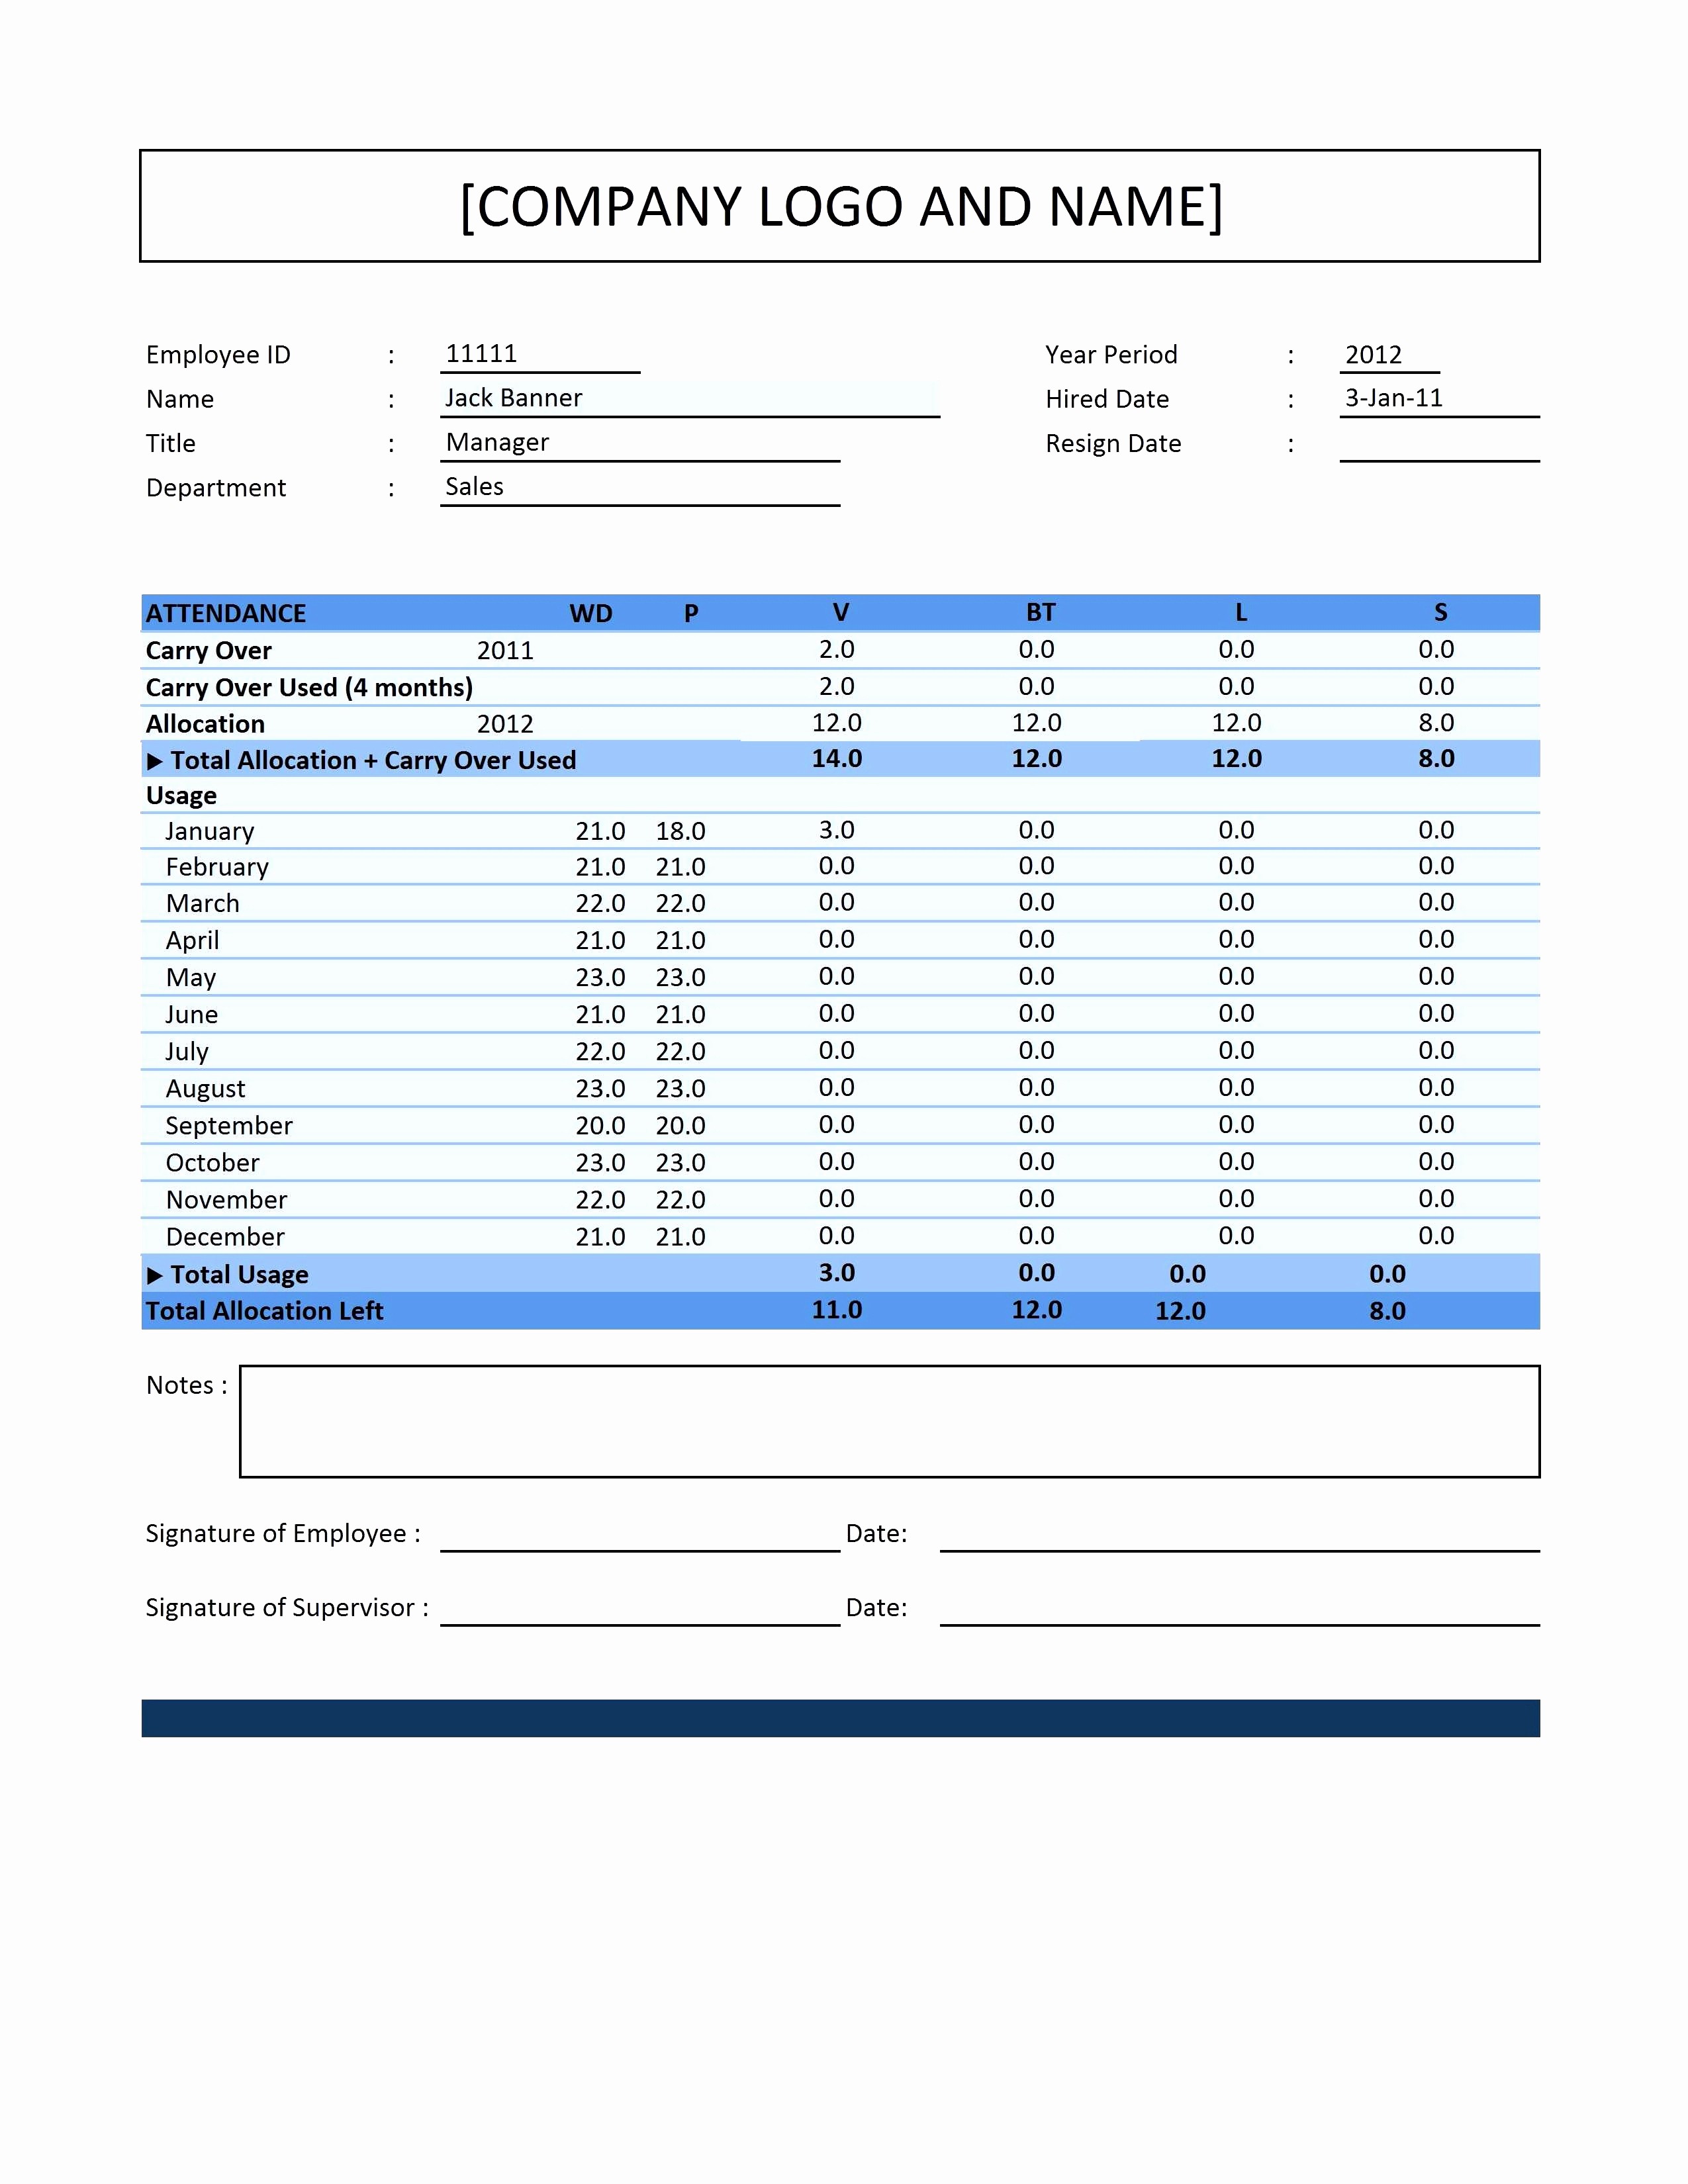 Microsoft Access Contract Management Template Awesome 50 Document Database